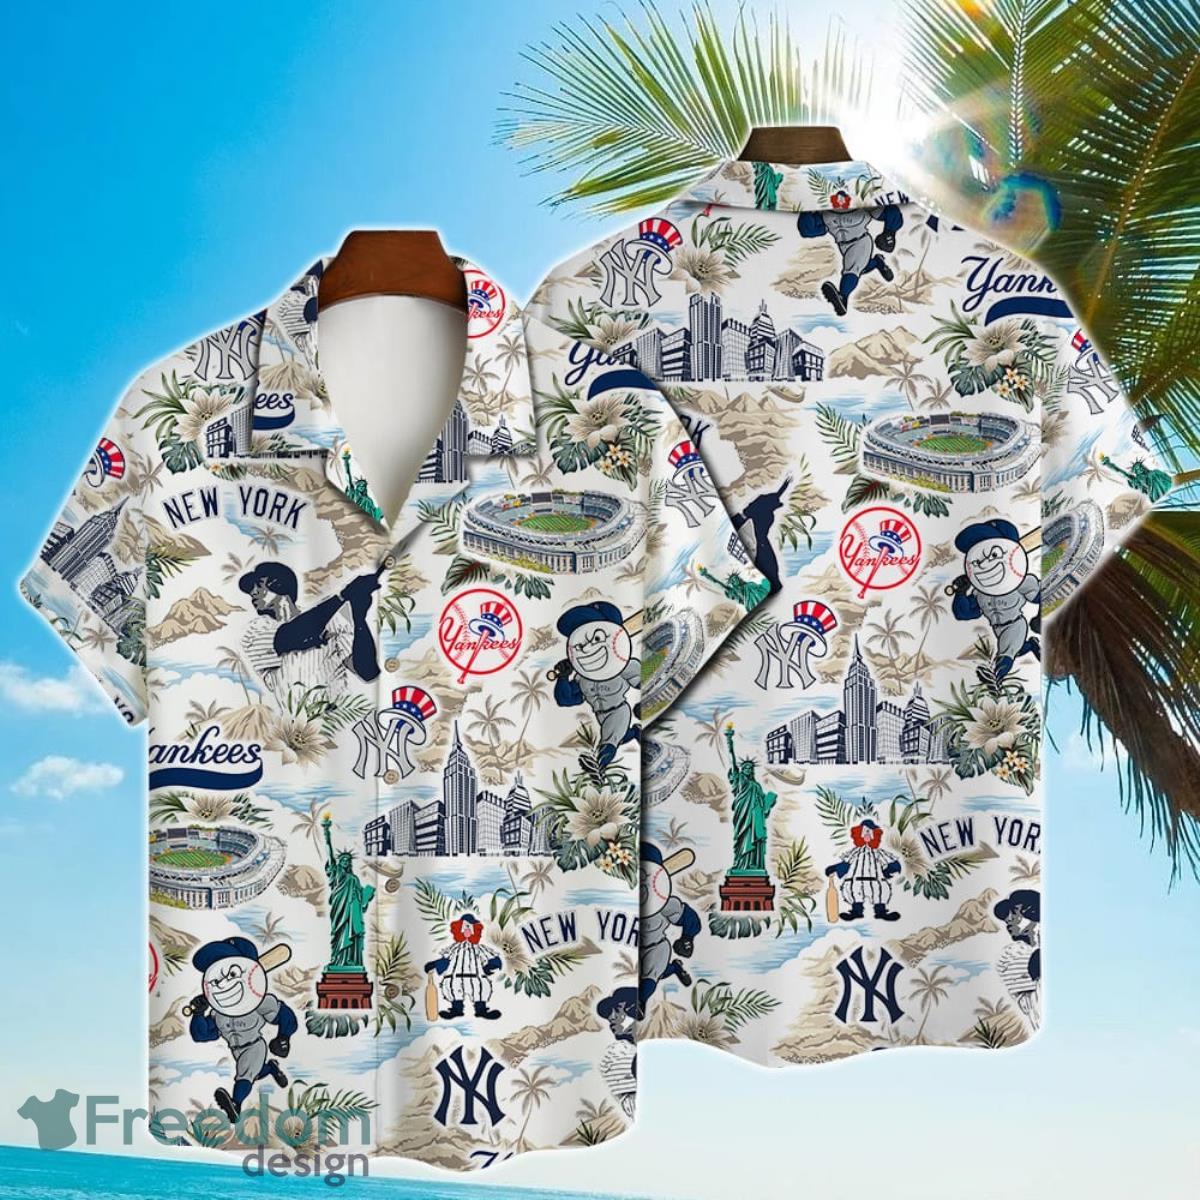 Vintage Yankees Shirt 3D Convenient Skull New York Yankees Gifts For Her -  Personalized Gifts: Family, Sports, Occasions, Trending